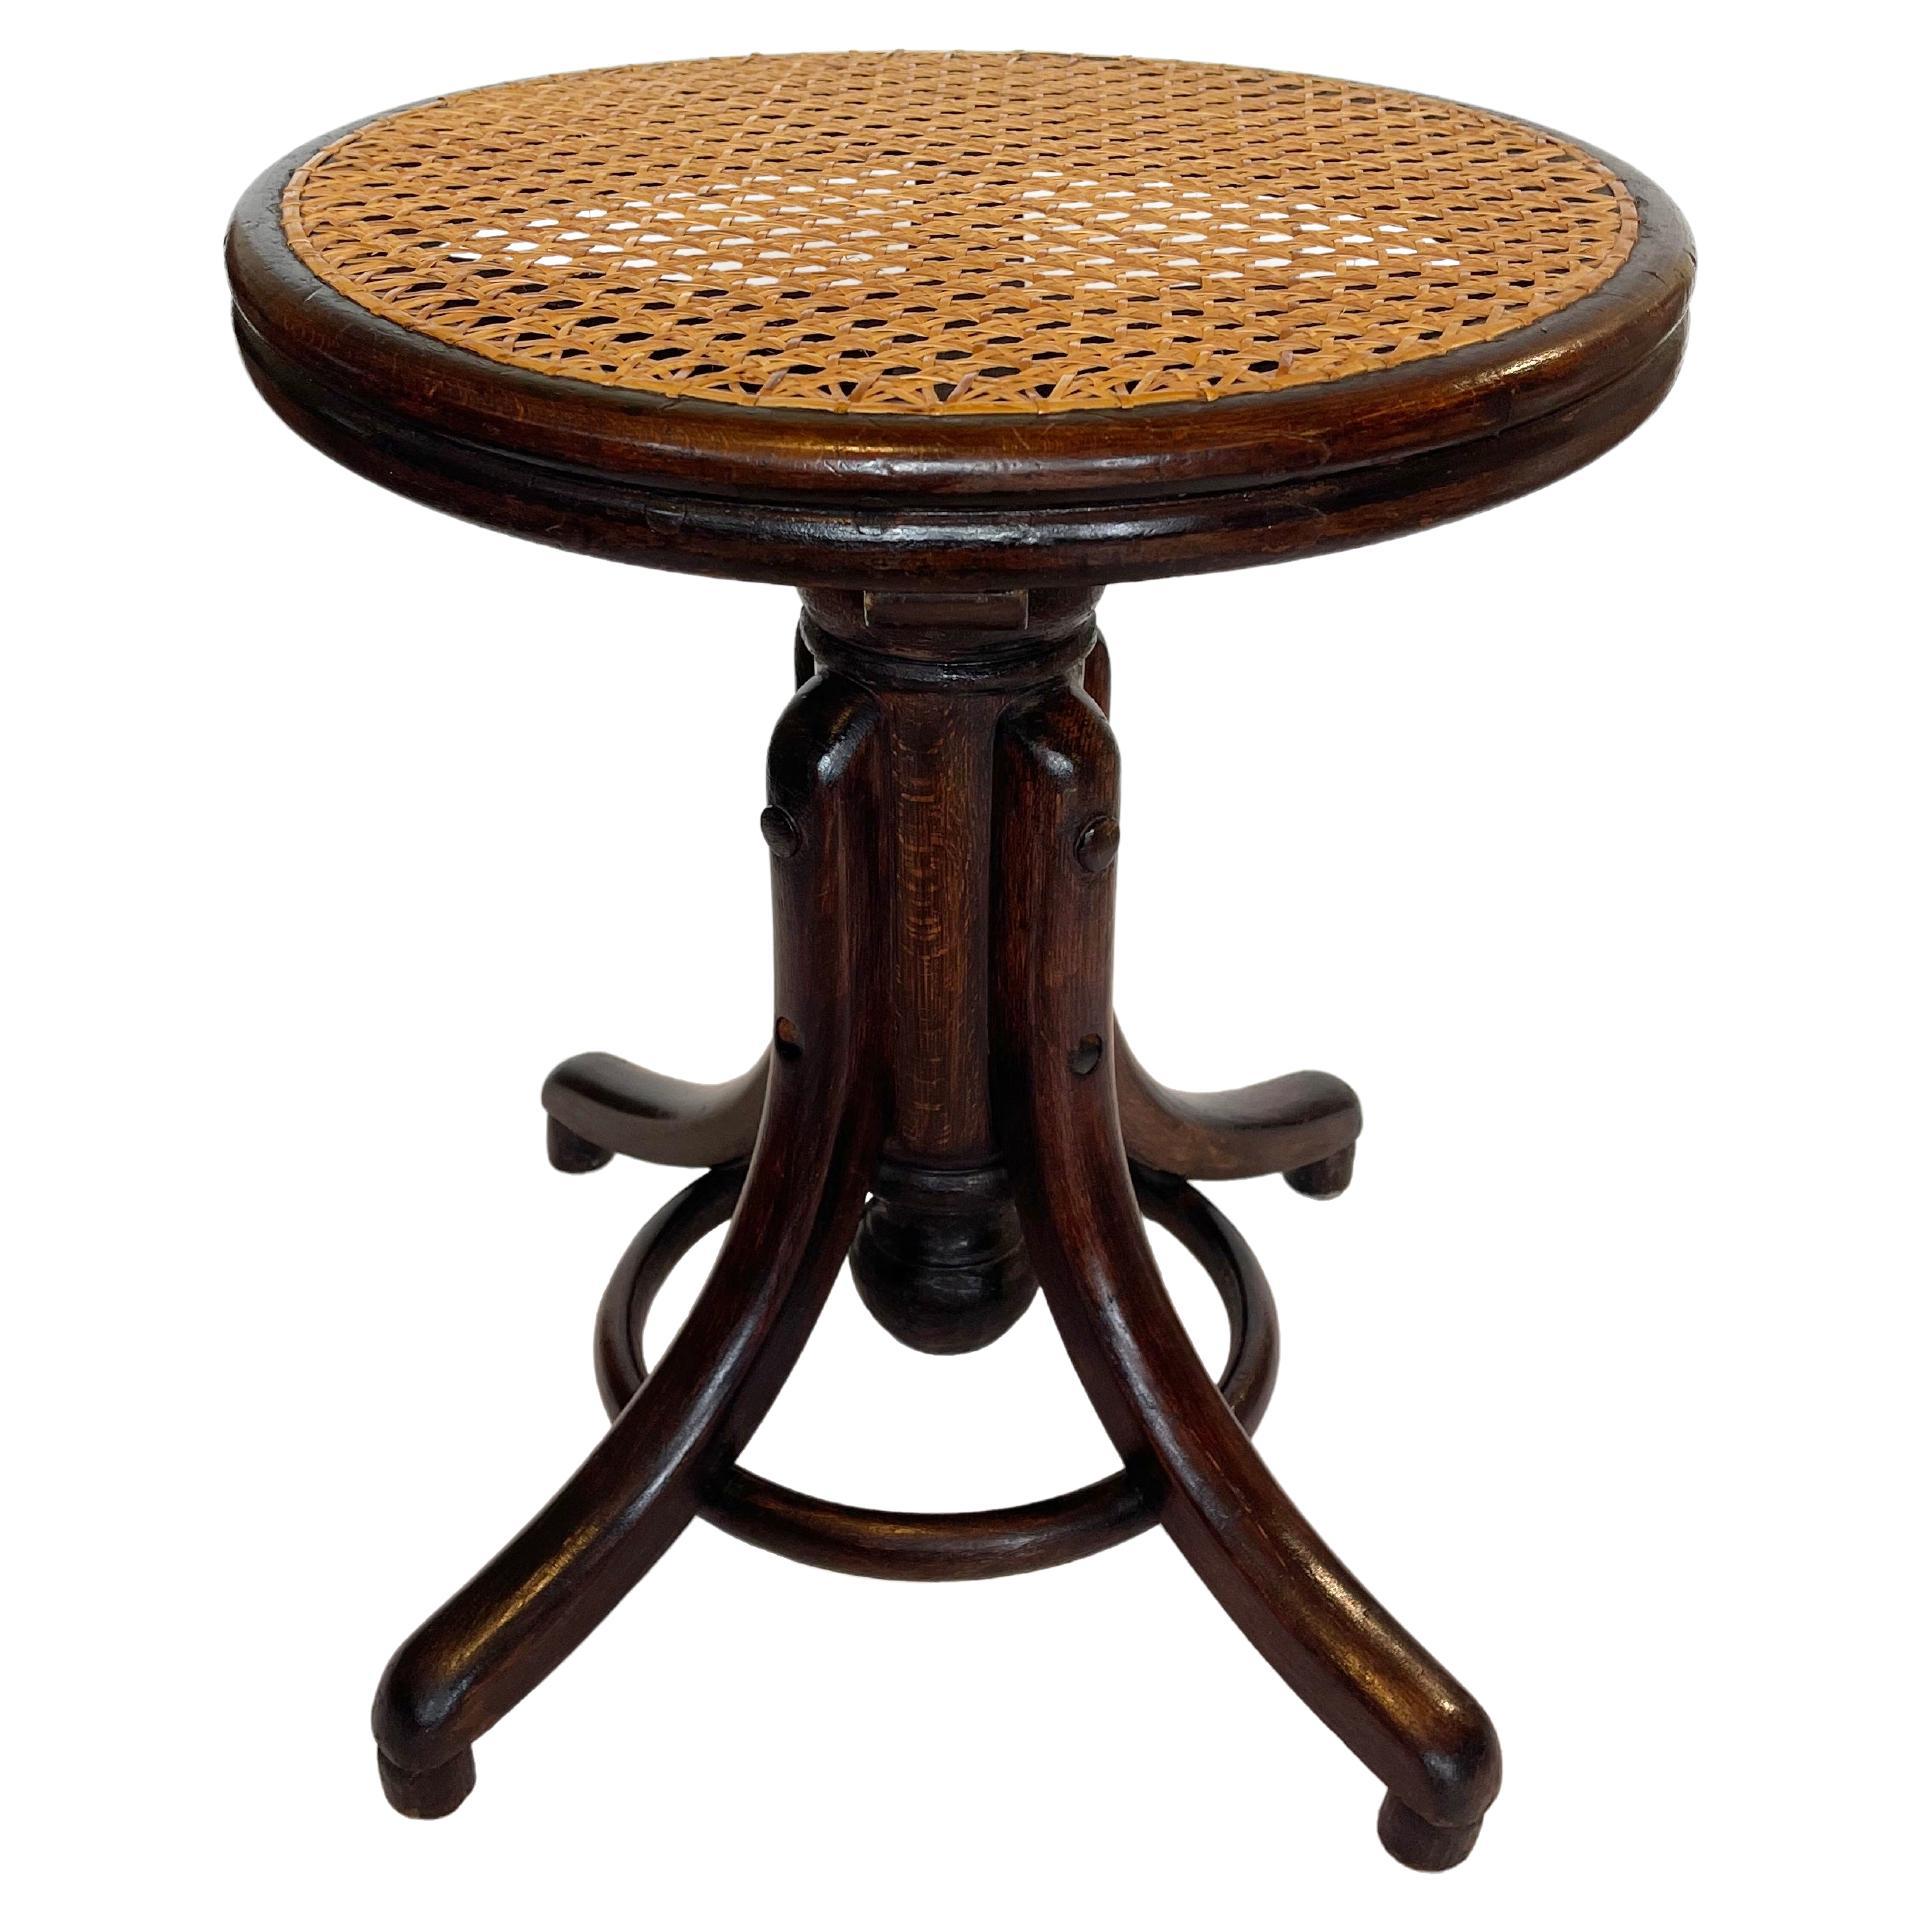 Impressive original 1900s to 1910s piano stool by D. G. Fischel, Austria.
The original design had been made by Thonet.
Dark Brown Bentwood with even darker varnish in a mahogany vibe.
The beautiful Vienna weave seat comes in a light brown colour and